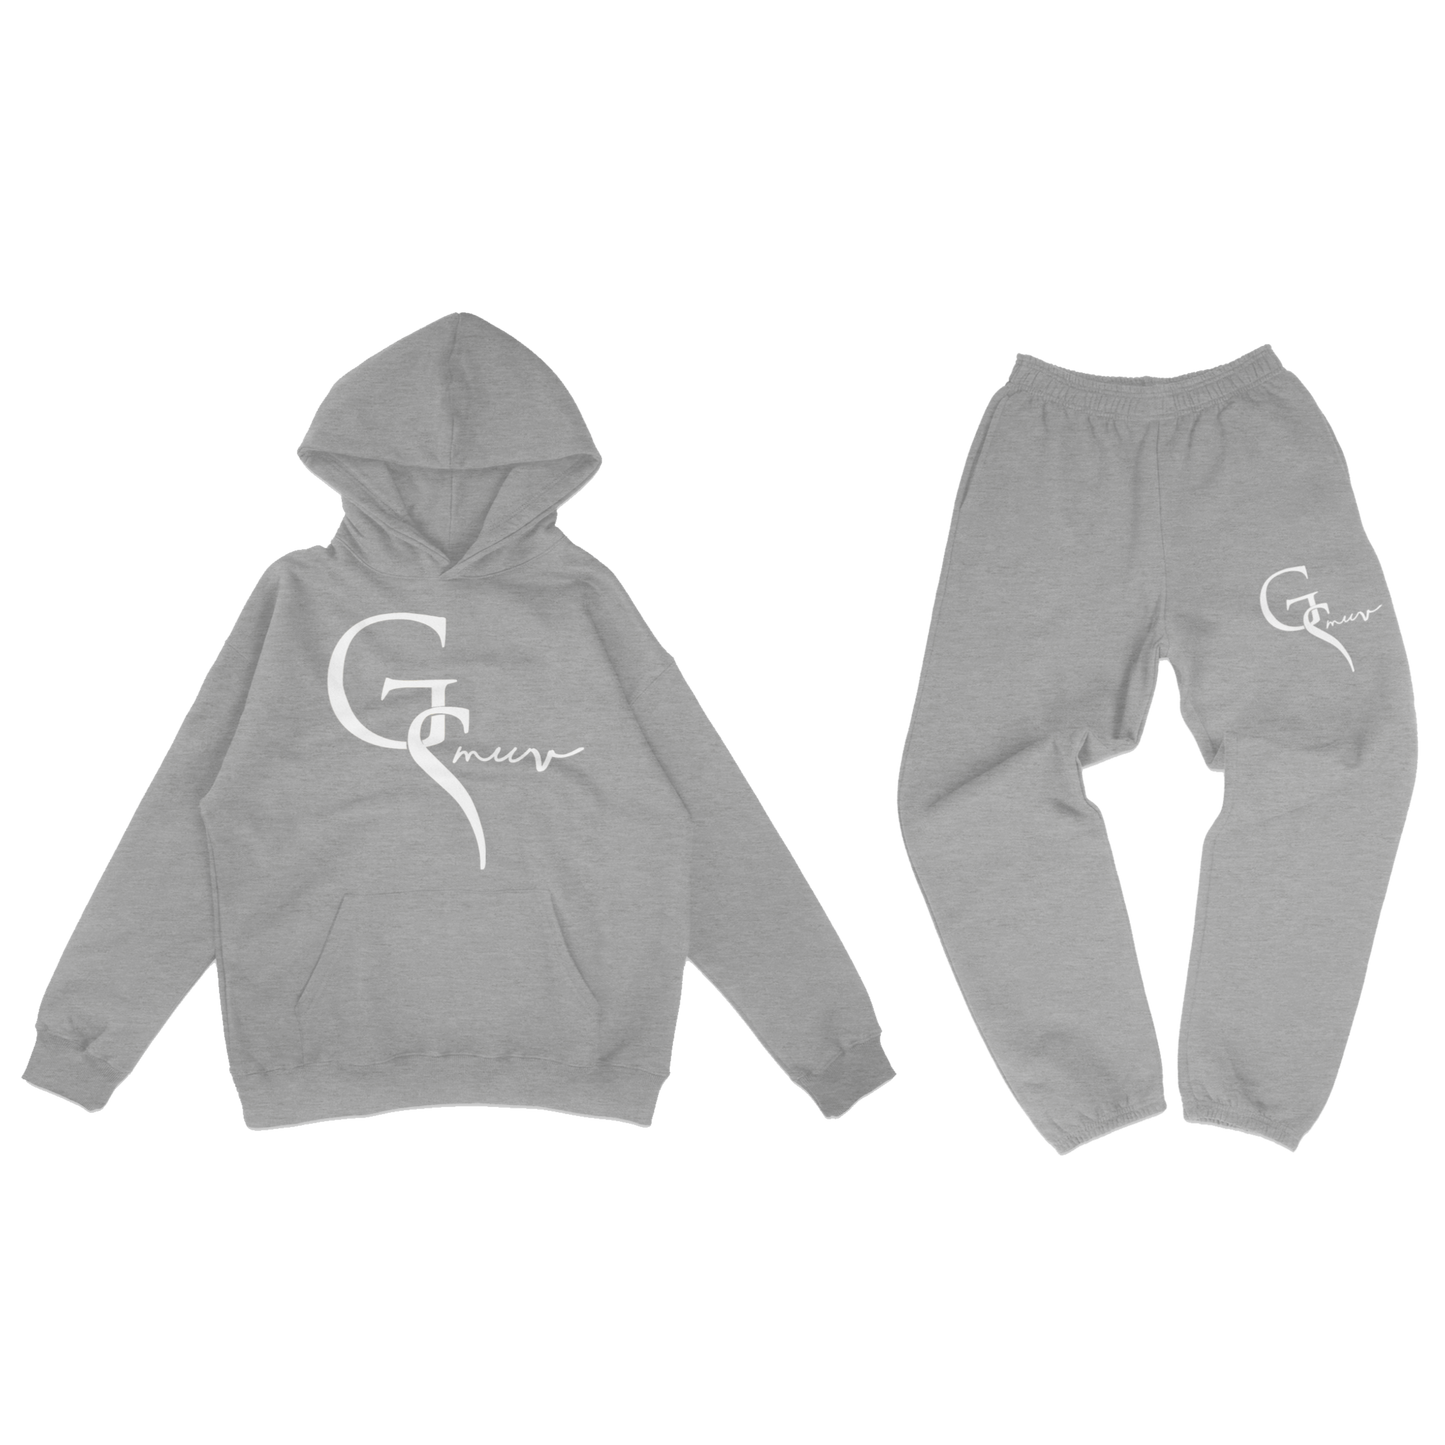 A gray hoodie and gray sweatpants. Both hoodie and sweatpants have a white GSMUV  logo on the front of them